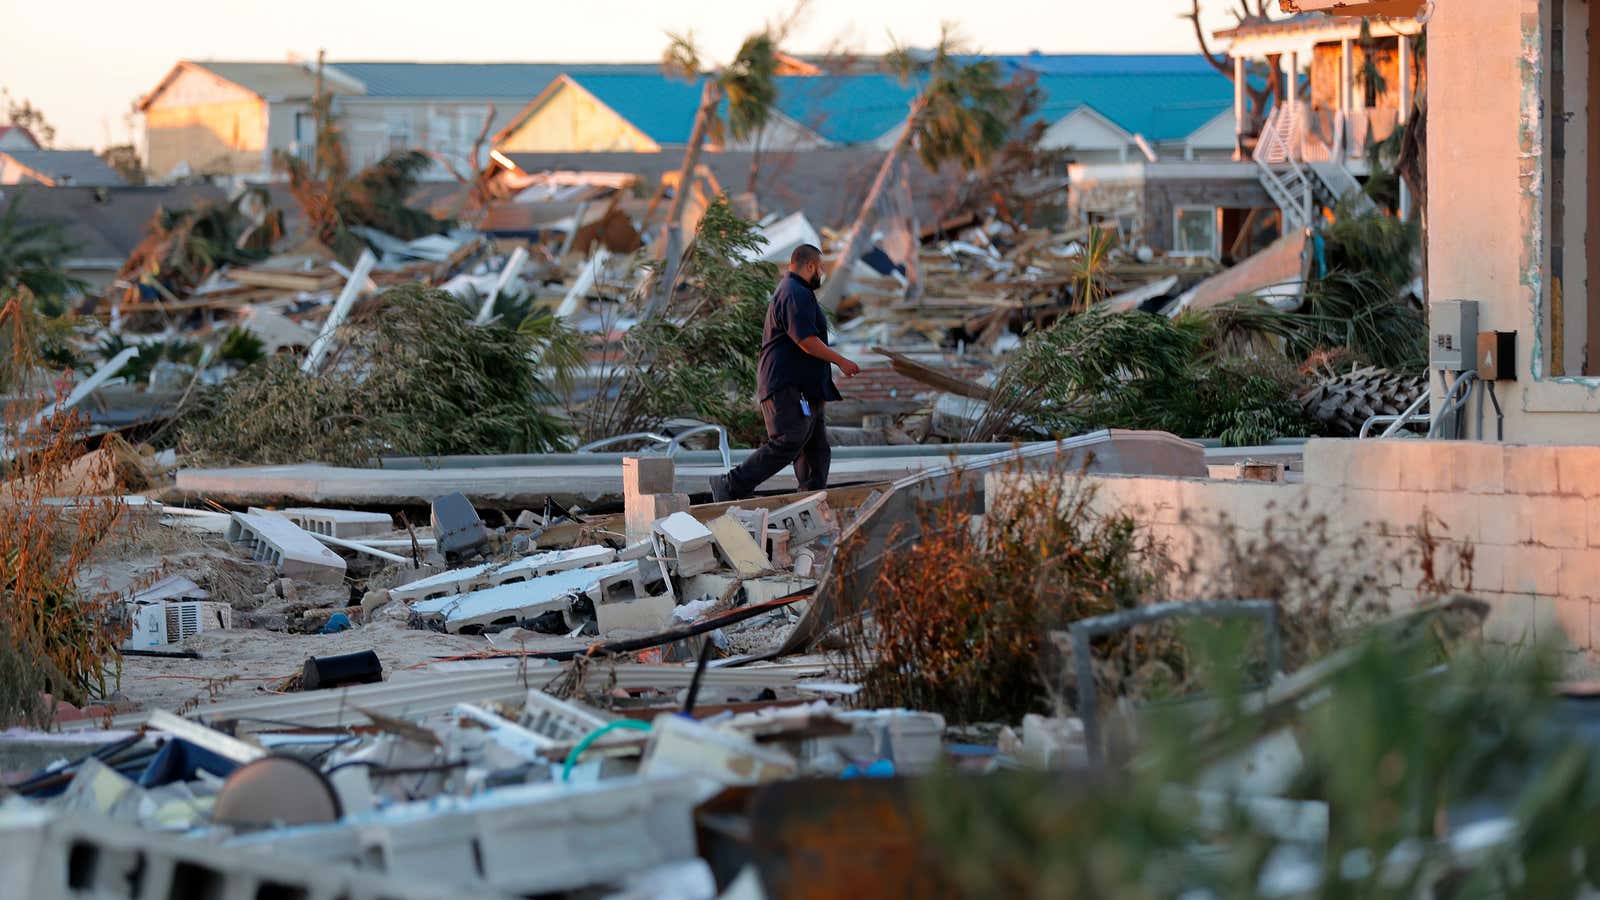 Hurricane survivors’ data was improperly sent to a federal contractor.